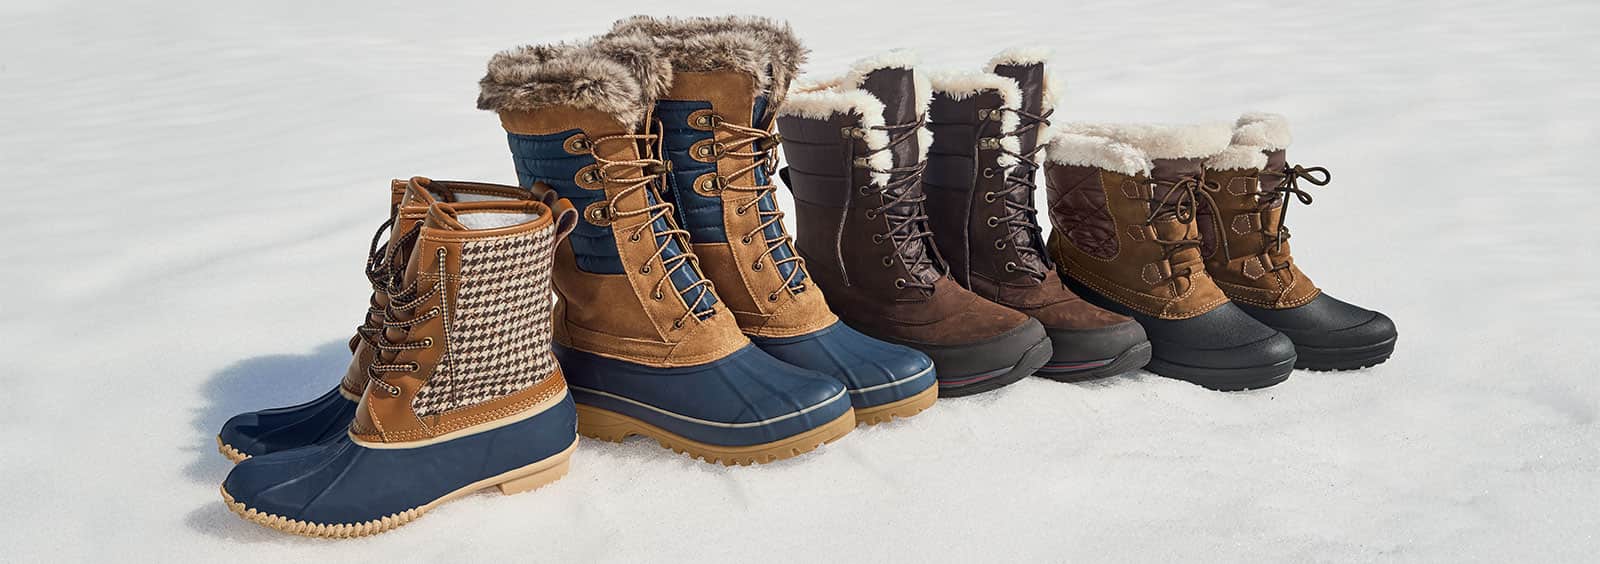 Boot Basics: What to Wear Based on the Forecast